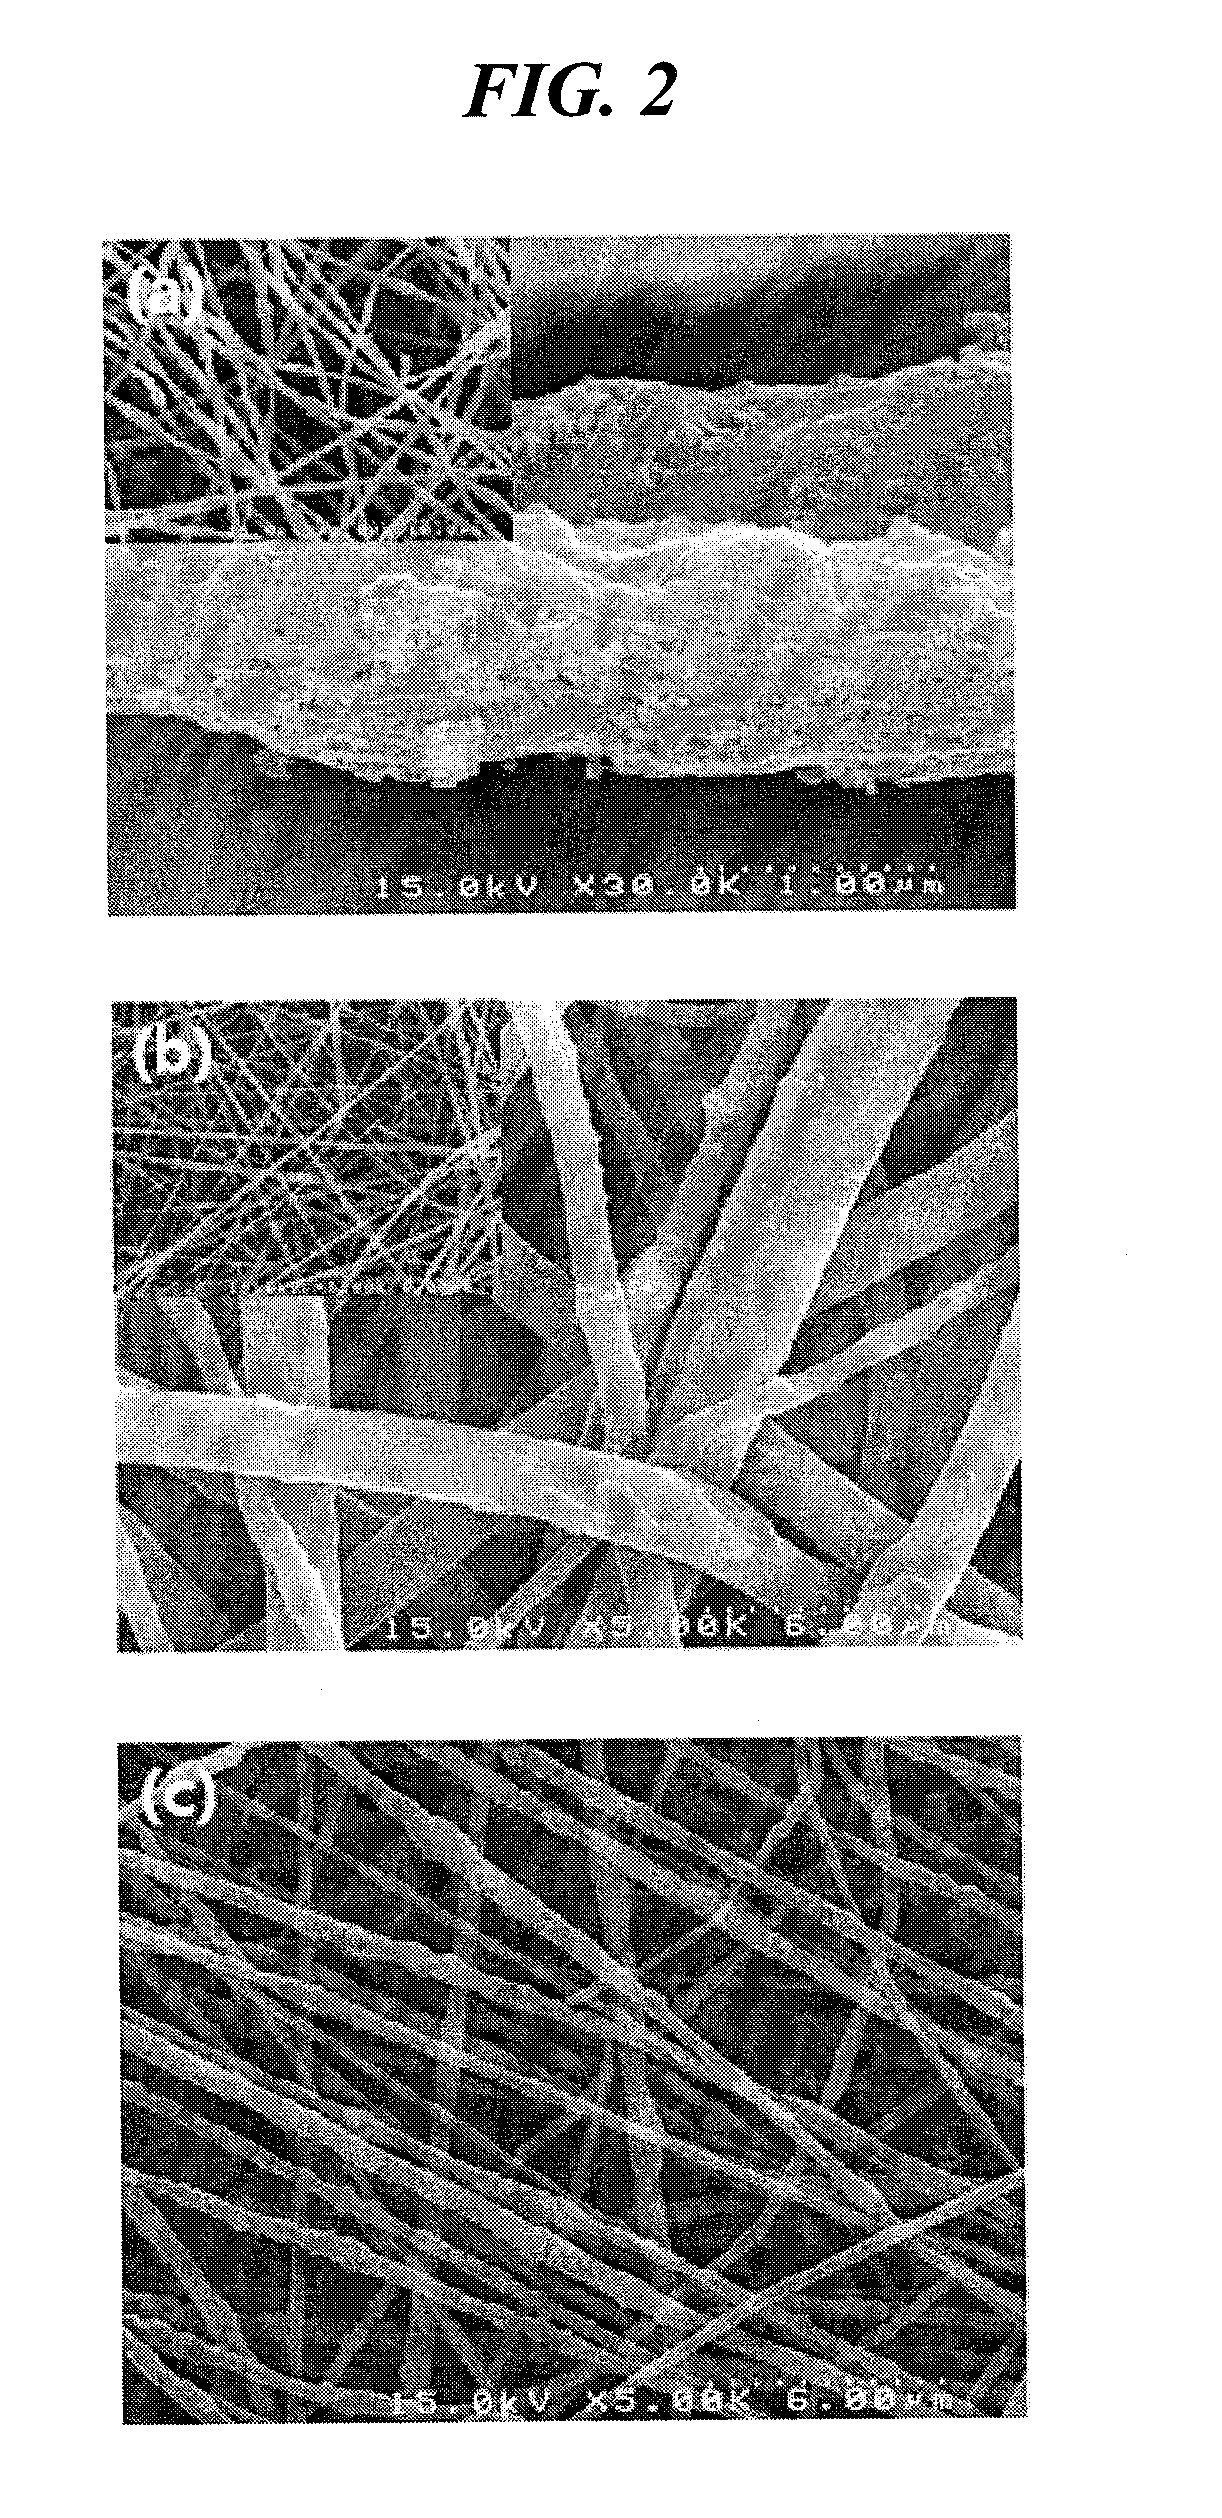 Metal oxide ultrafine fiber-based composite separator with heat resistance and secondary battery using same